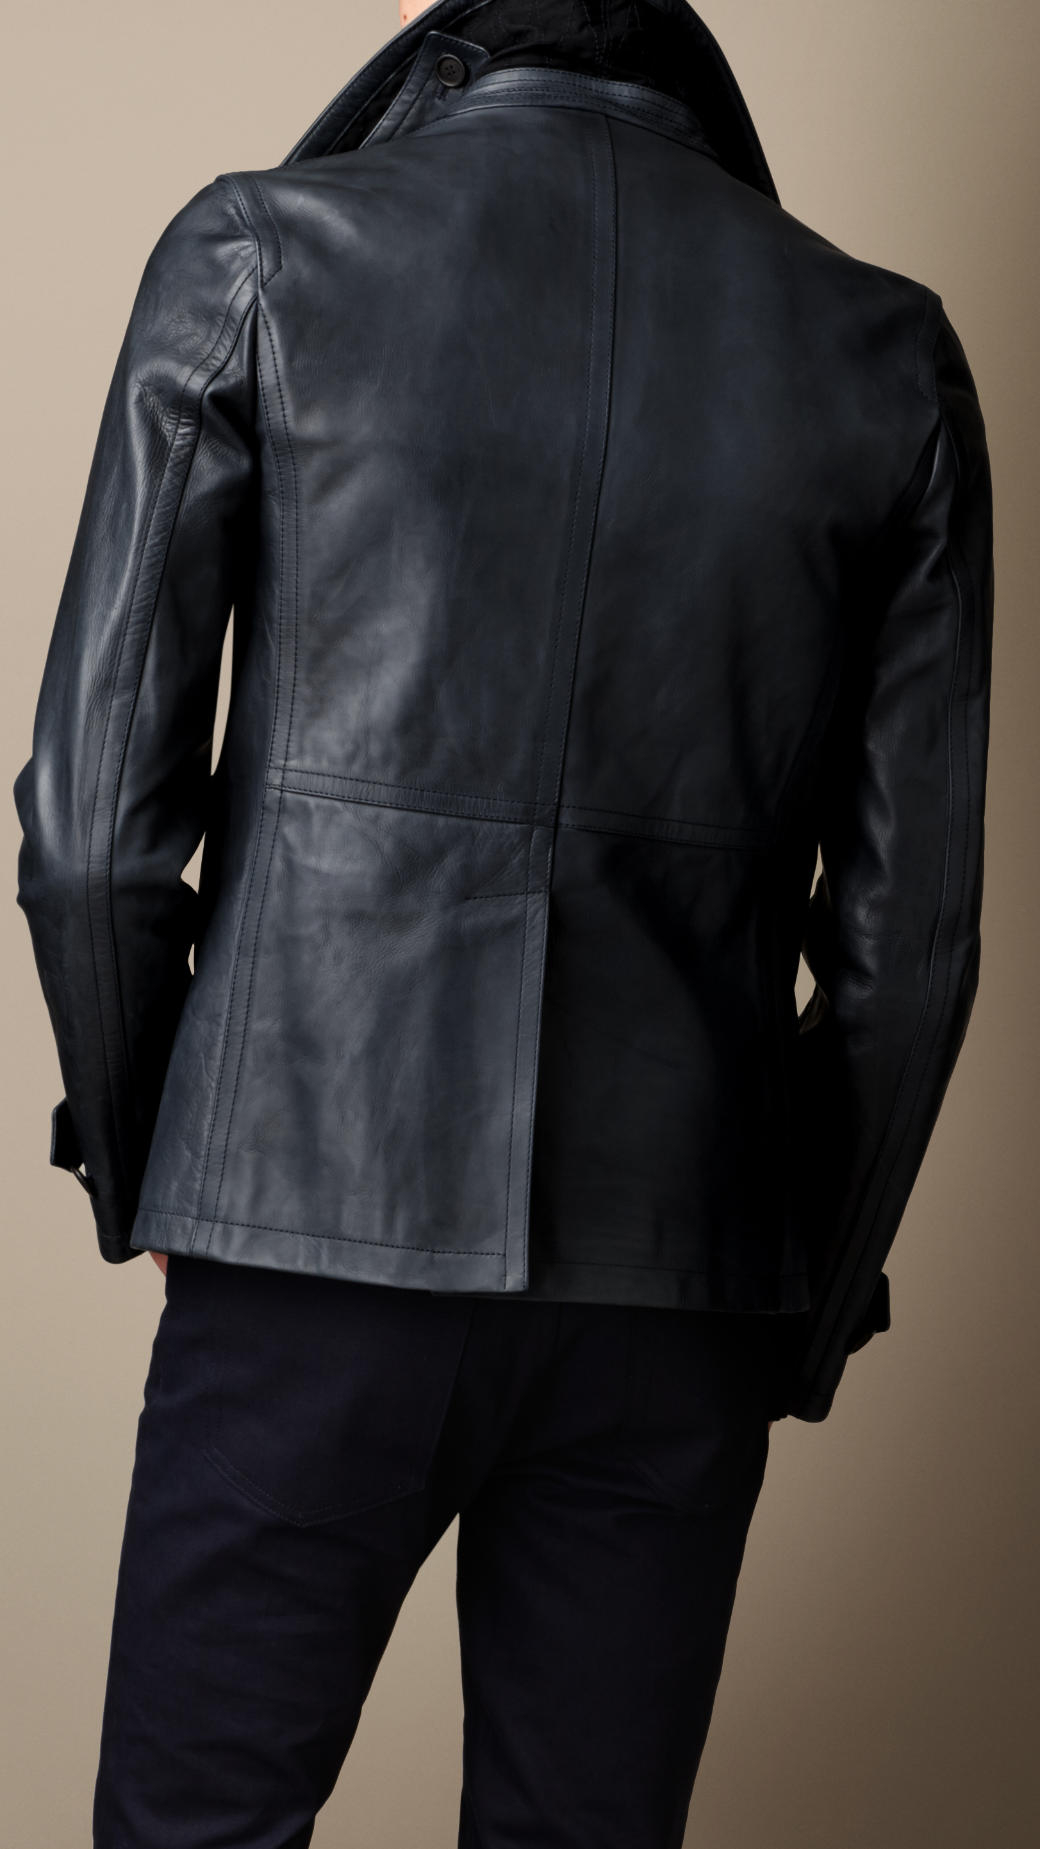 Lyst - Burberry Leather Pea Coat in Blue for Men